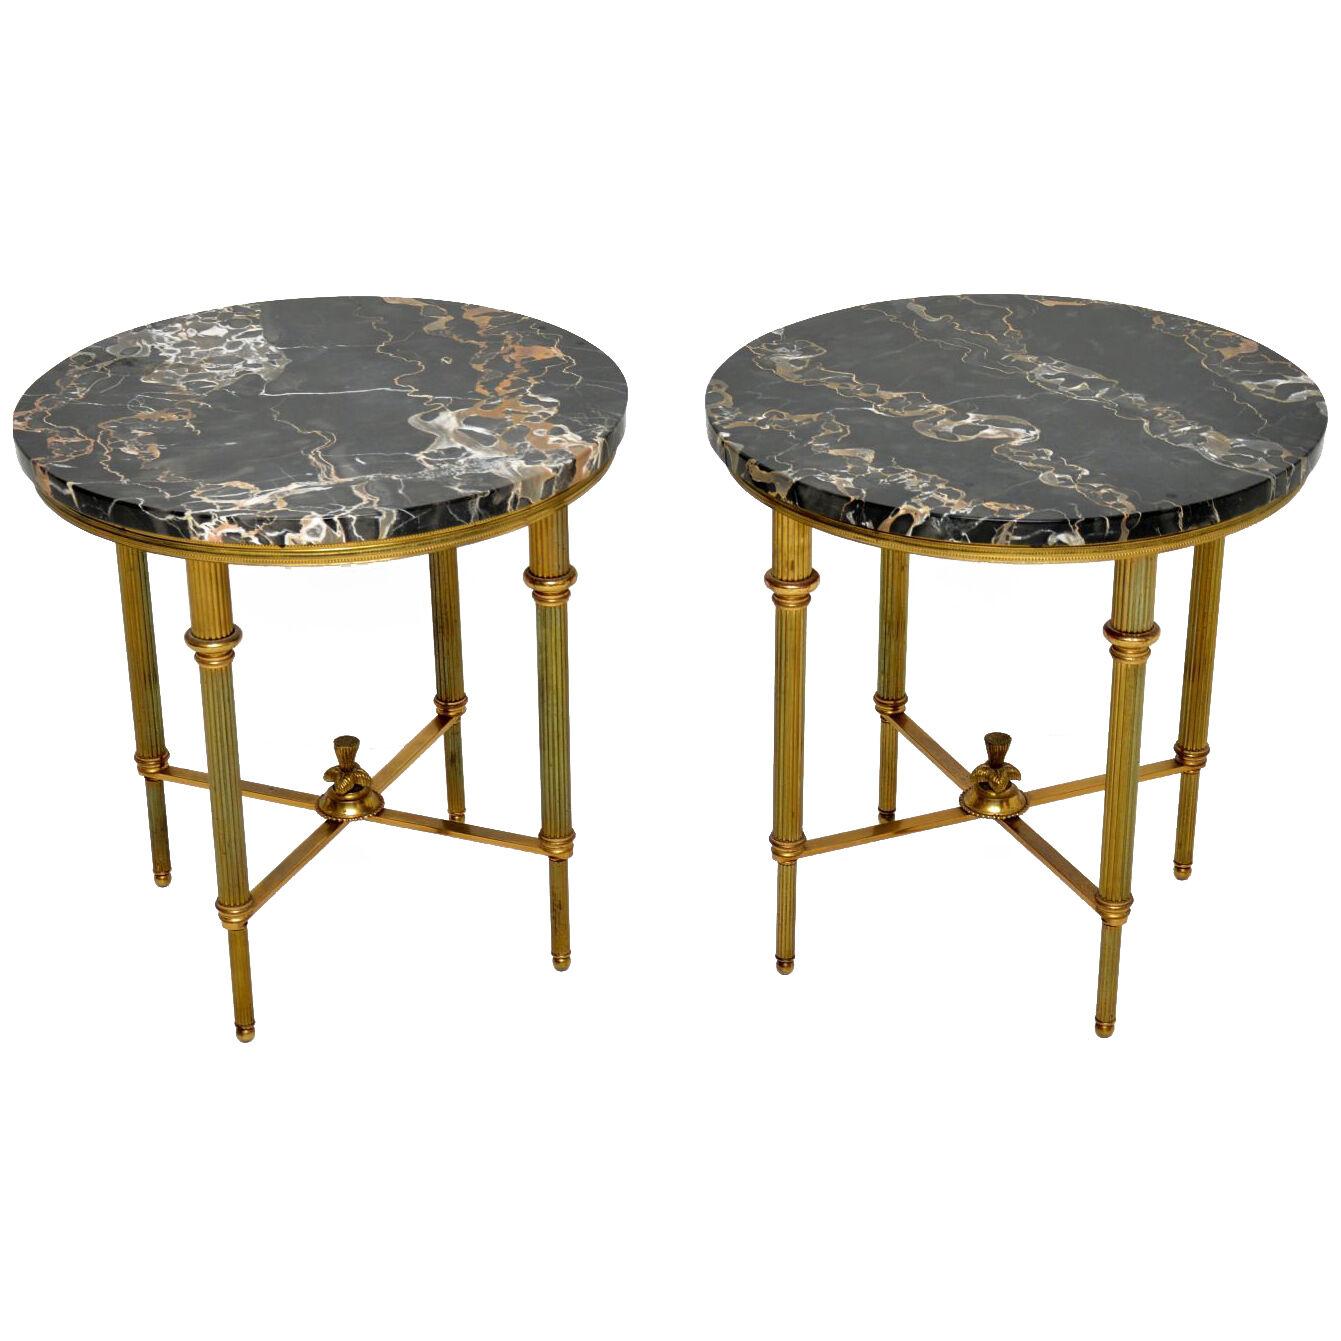 Pair of Antique French Brass & Marble Side Tables